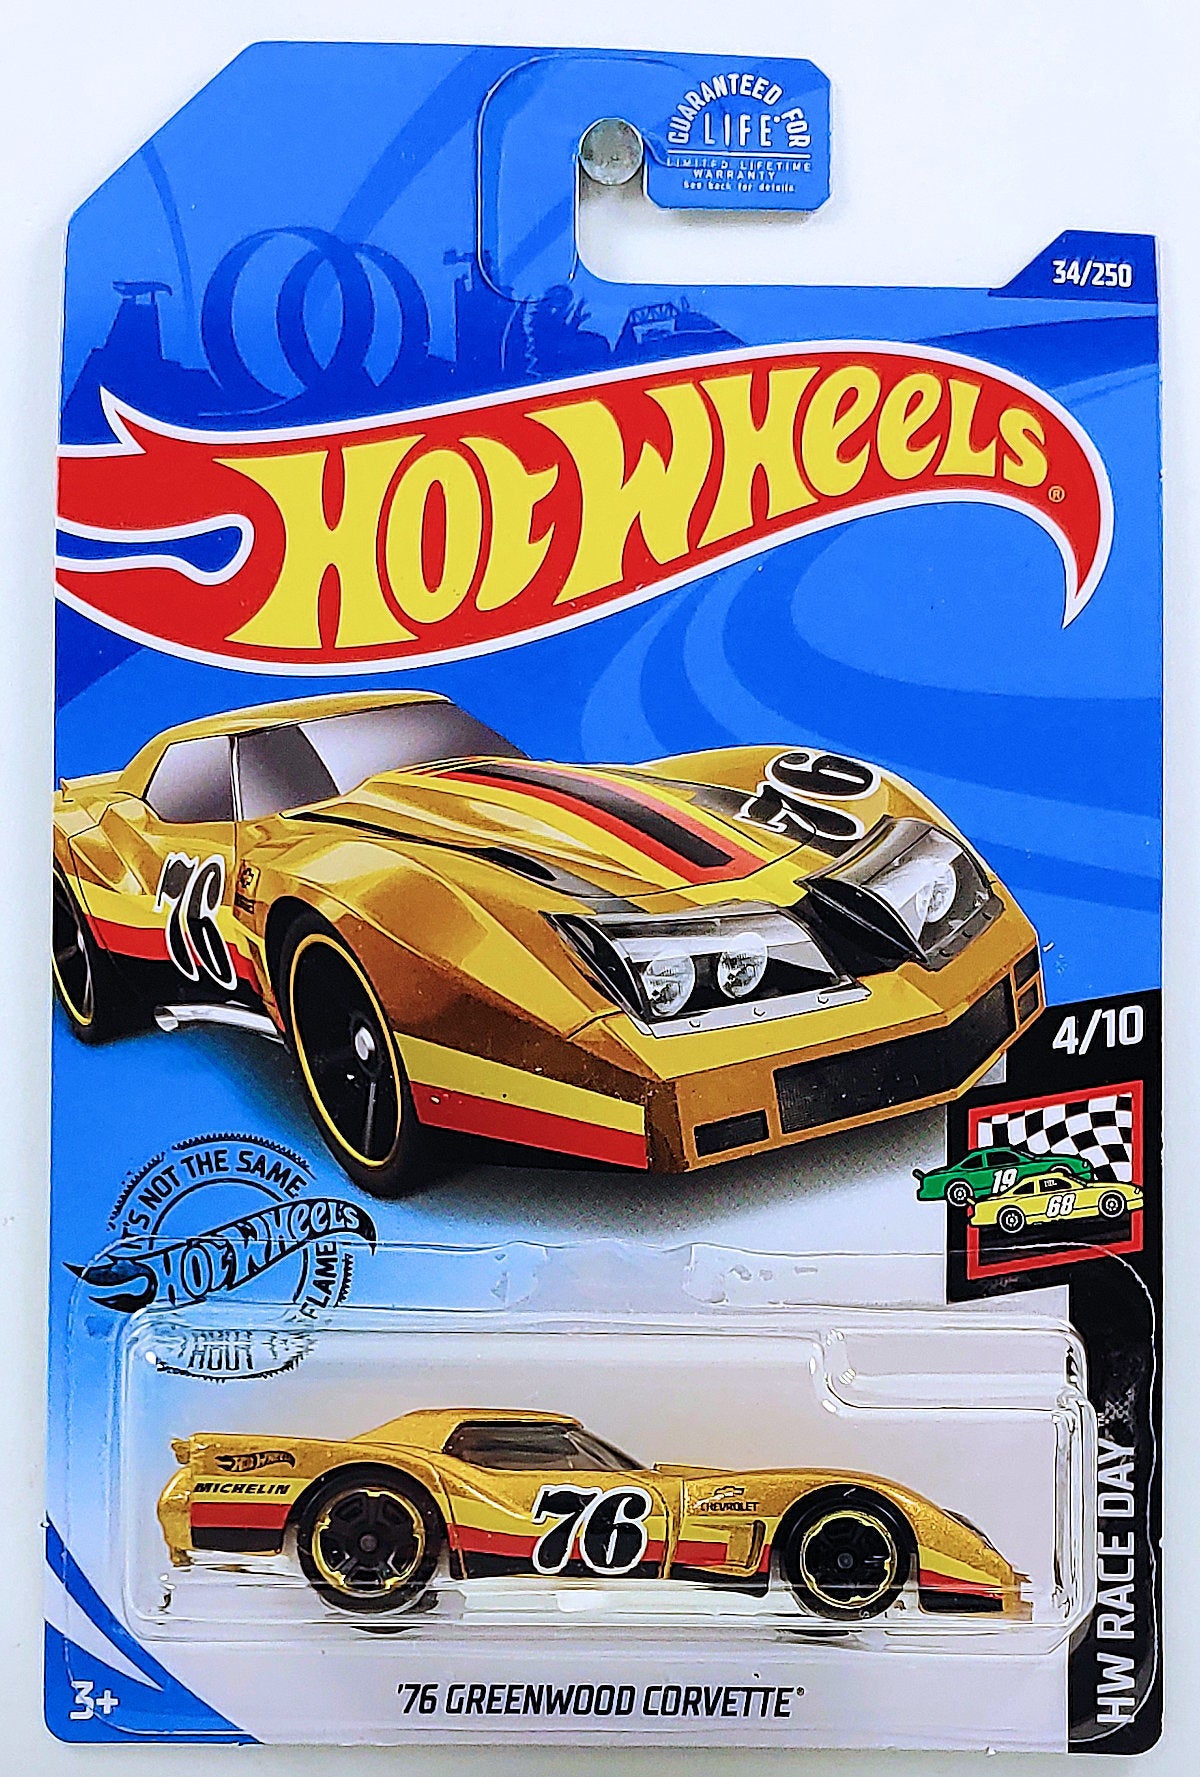 Hot Wheels 2020 - Collector # 034/250 - HW Race Day # 4/10 - '76 Greenwood Corvette - Gold - USA